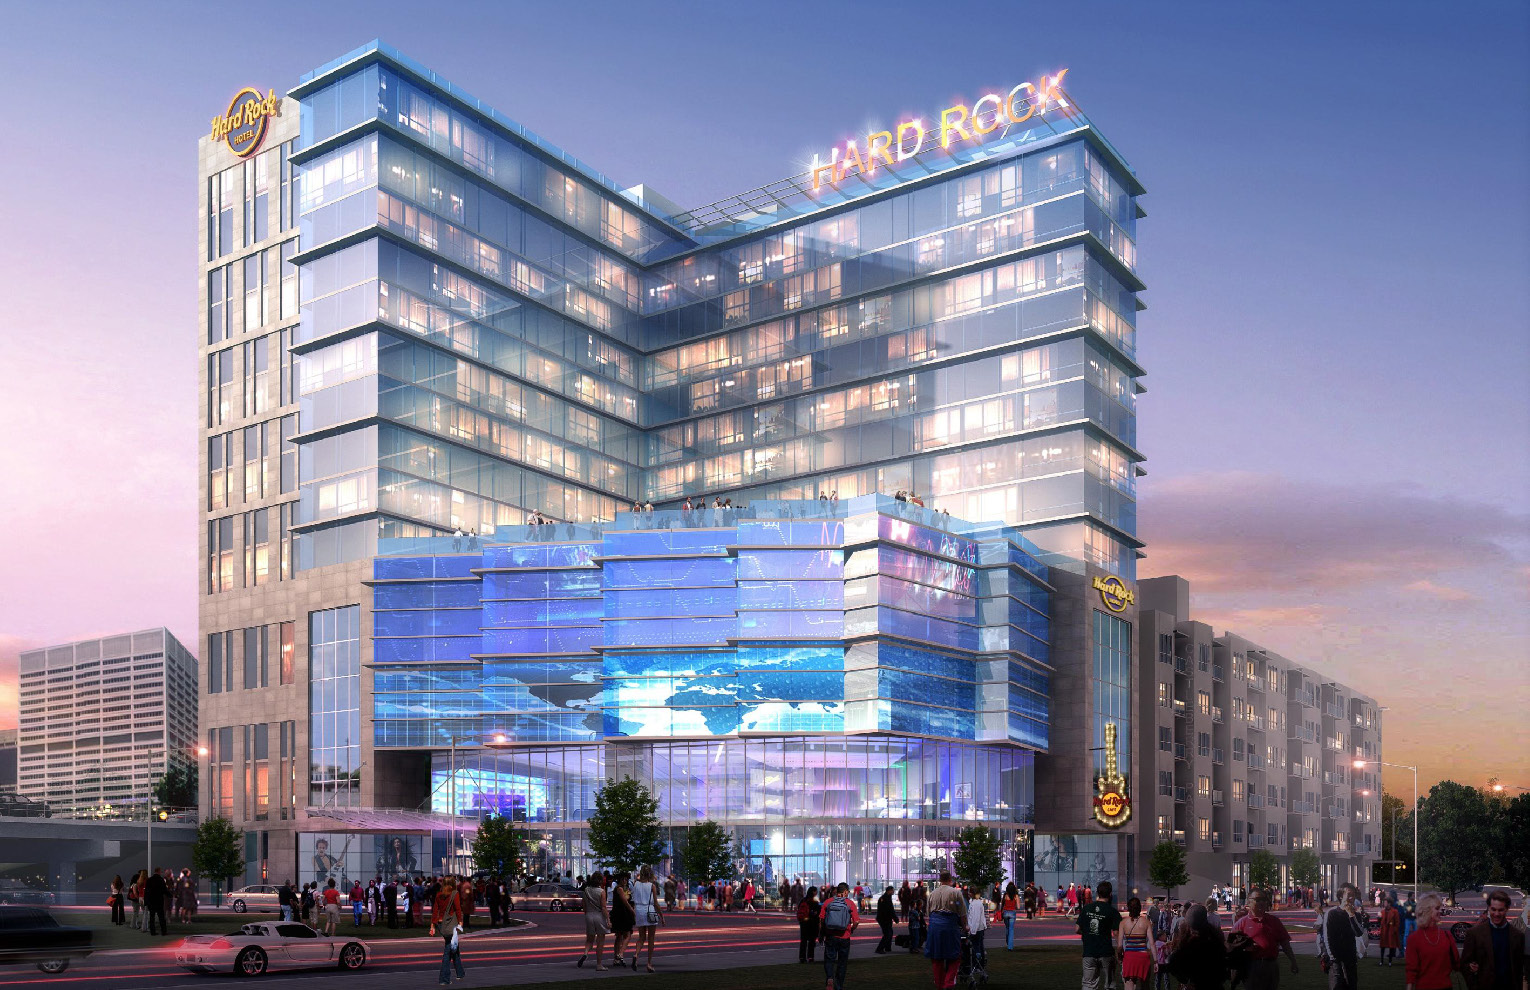 A newly released rendering of the Hard Rock Hotel project